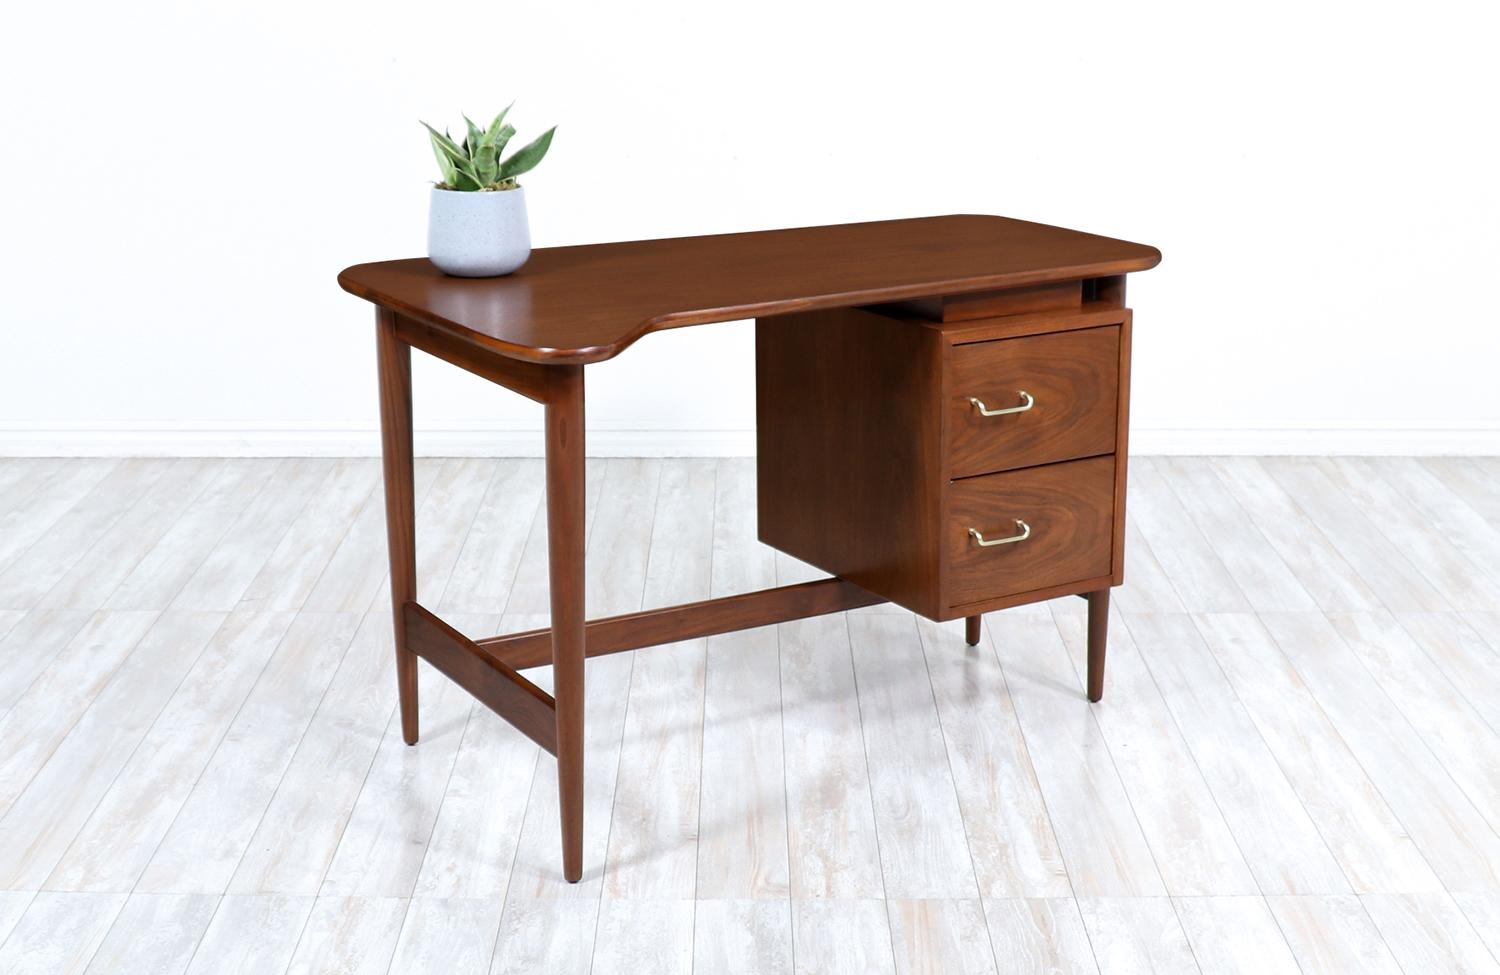 Merton L. Gershun walnut writing desk for American of Martinsville.

________________________________________

Transforming a piece of Mid-Century Modern furniture is like bringing history back to life, and we take this journey with passion and